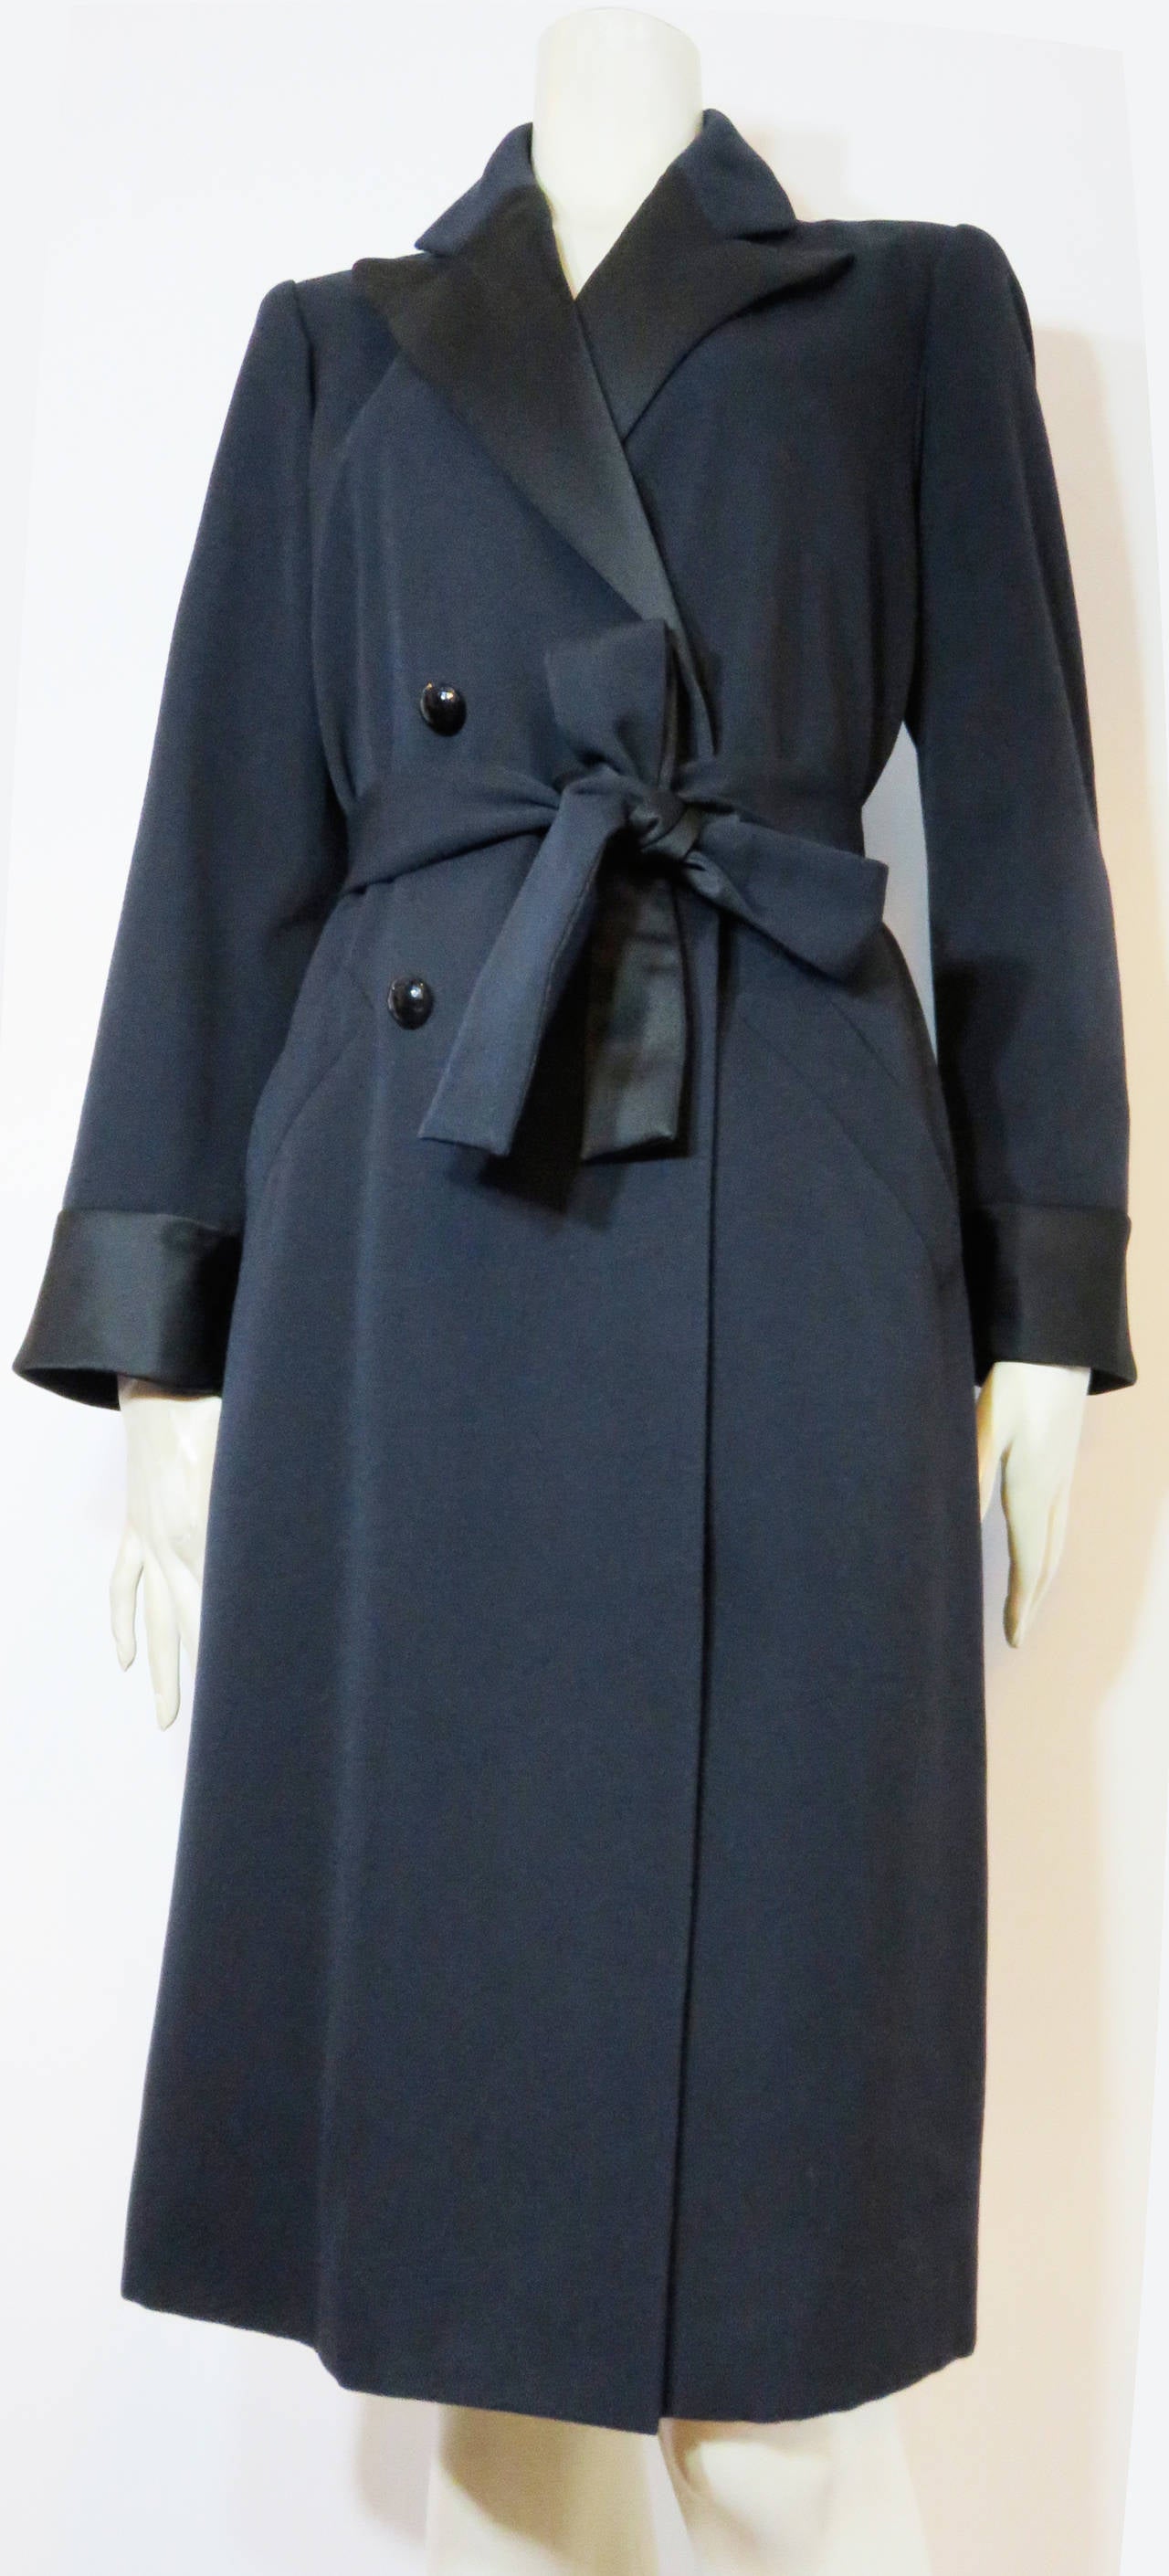 Never worn, 1980's YVES SAINT LAURENT Tuxedo coat dress.

This beautiful coat dress was designed by Yves Saint Laurent during the early 1980's in France.  

The coat dress features luxurious, black silk satin at the front lapels, cuffs, and the